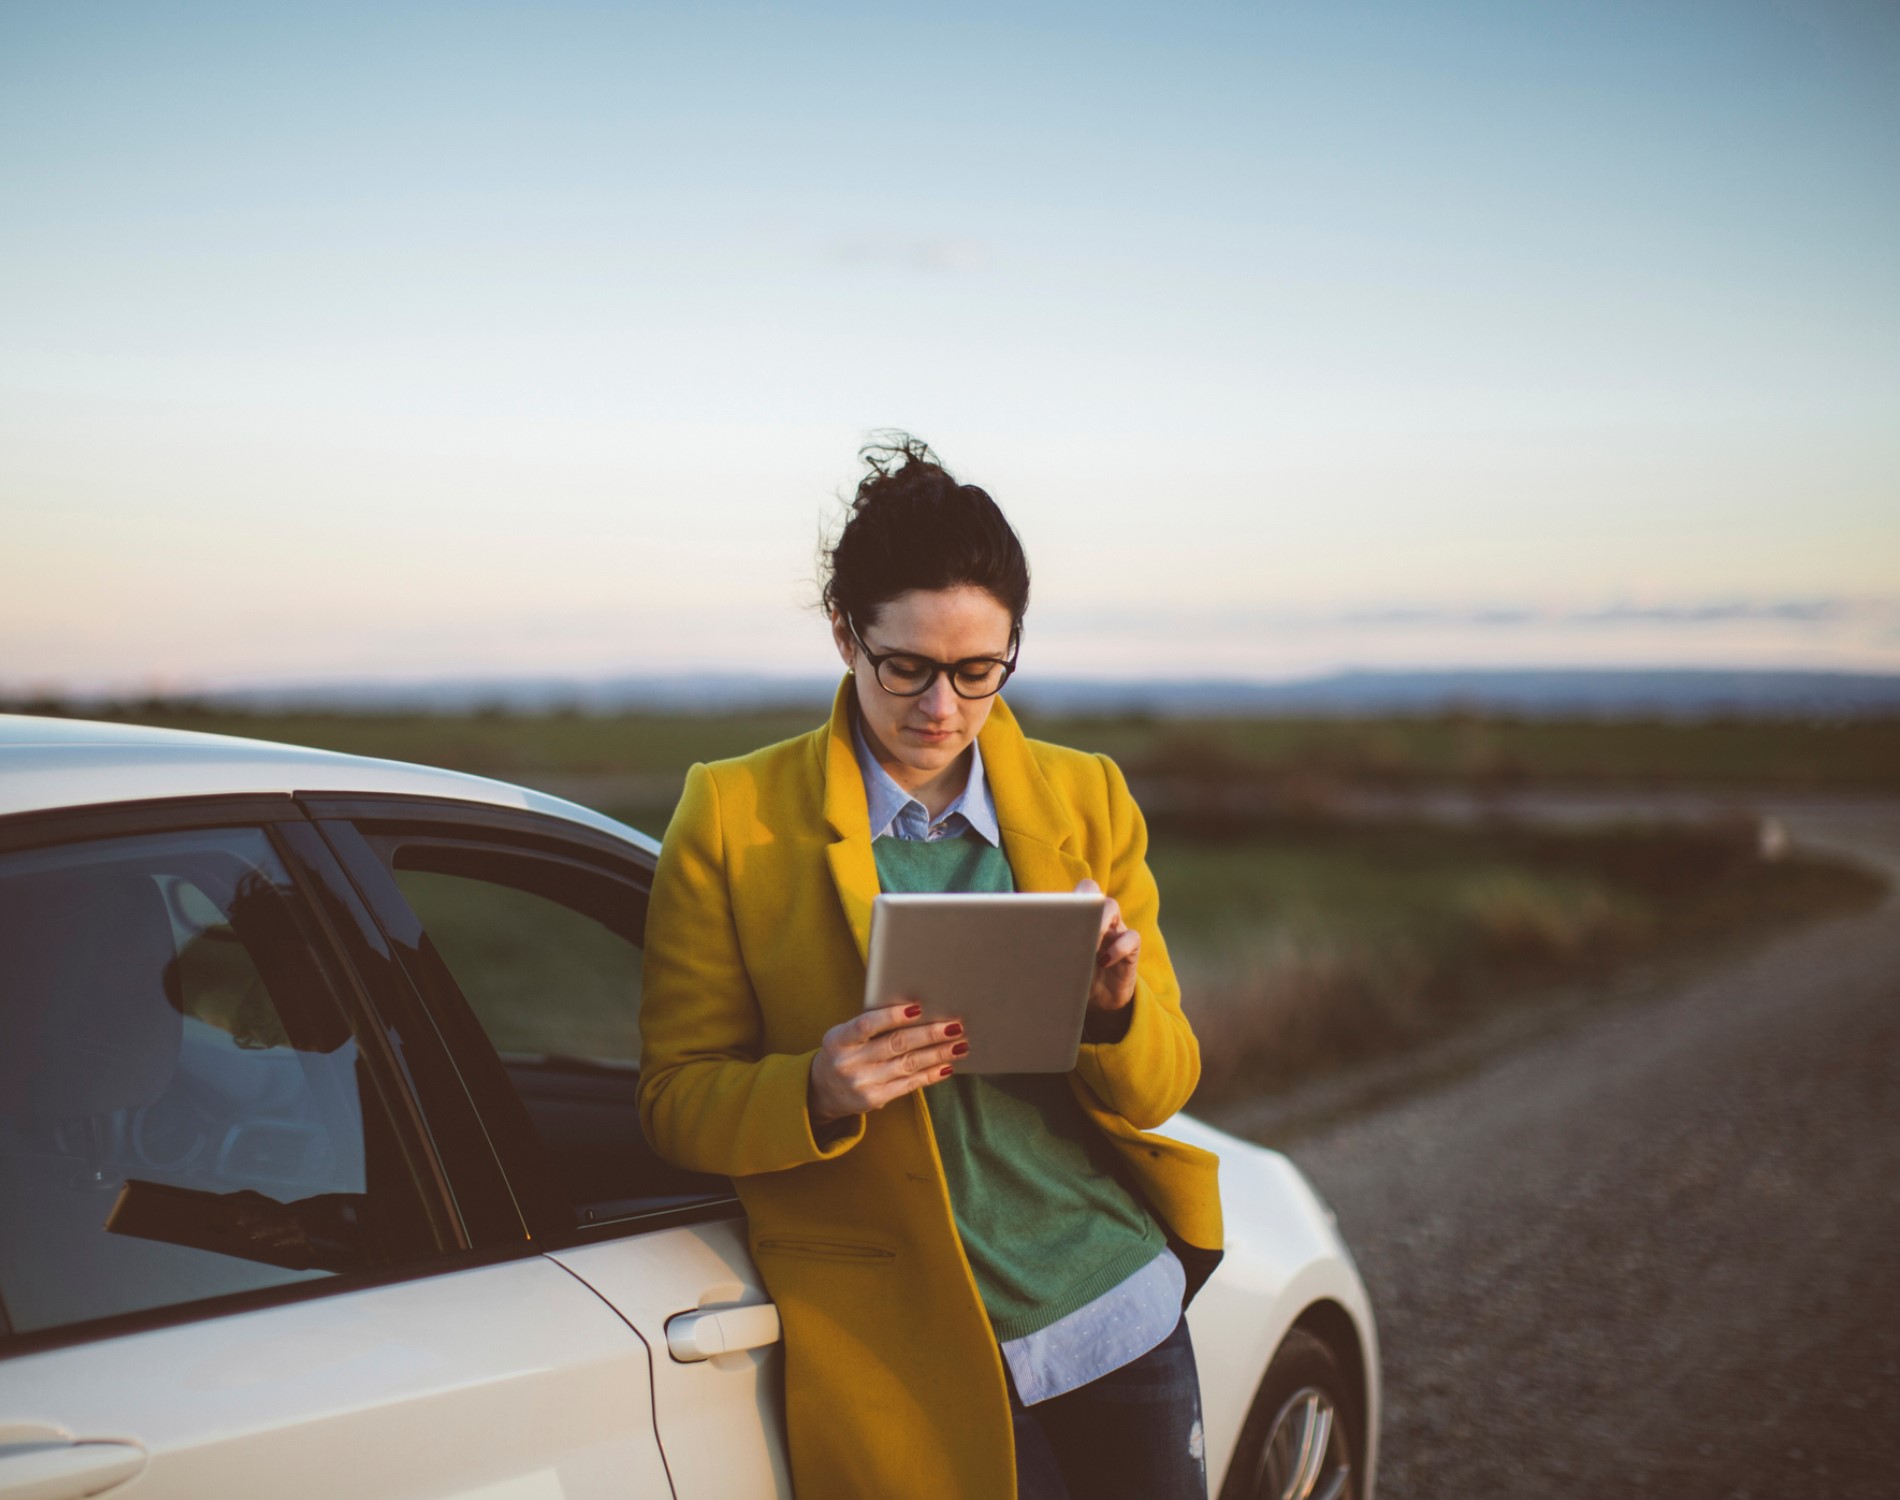 Woman on tablet leaning on car